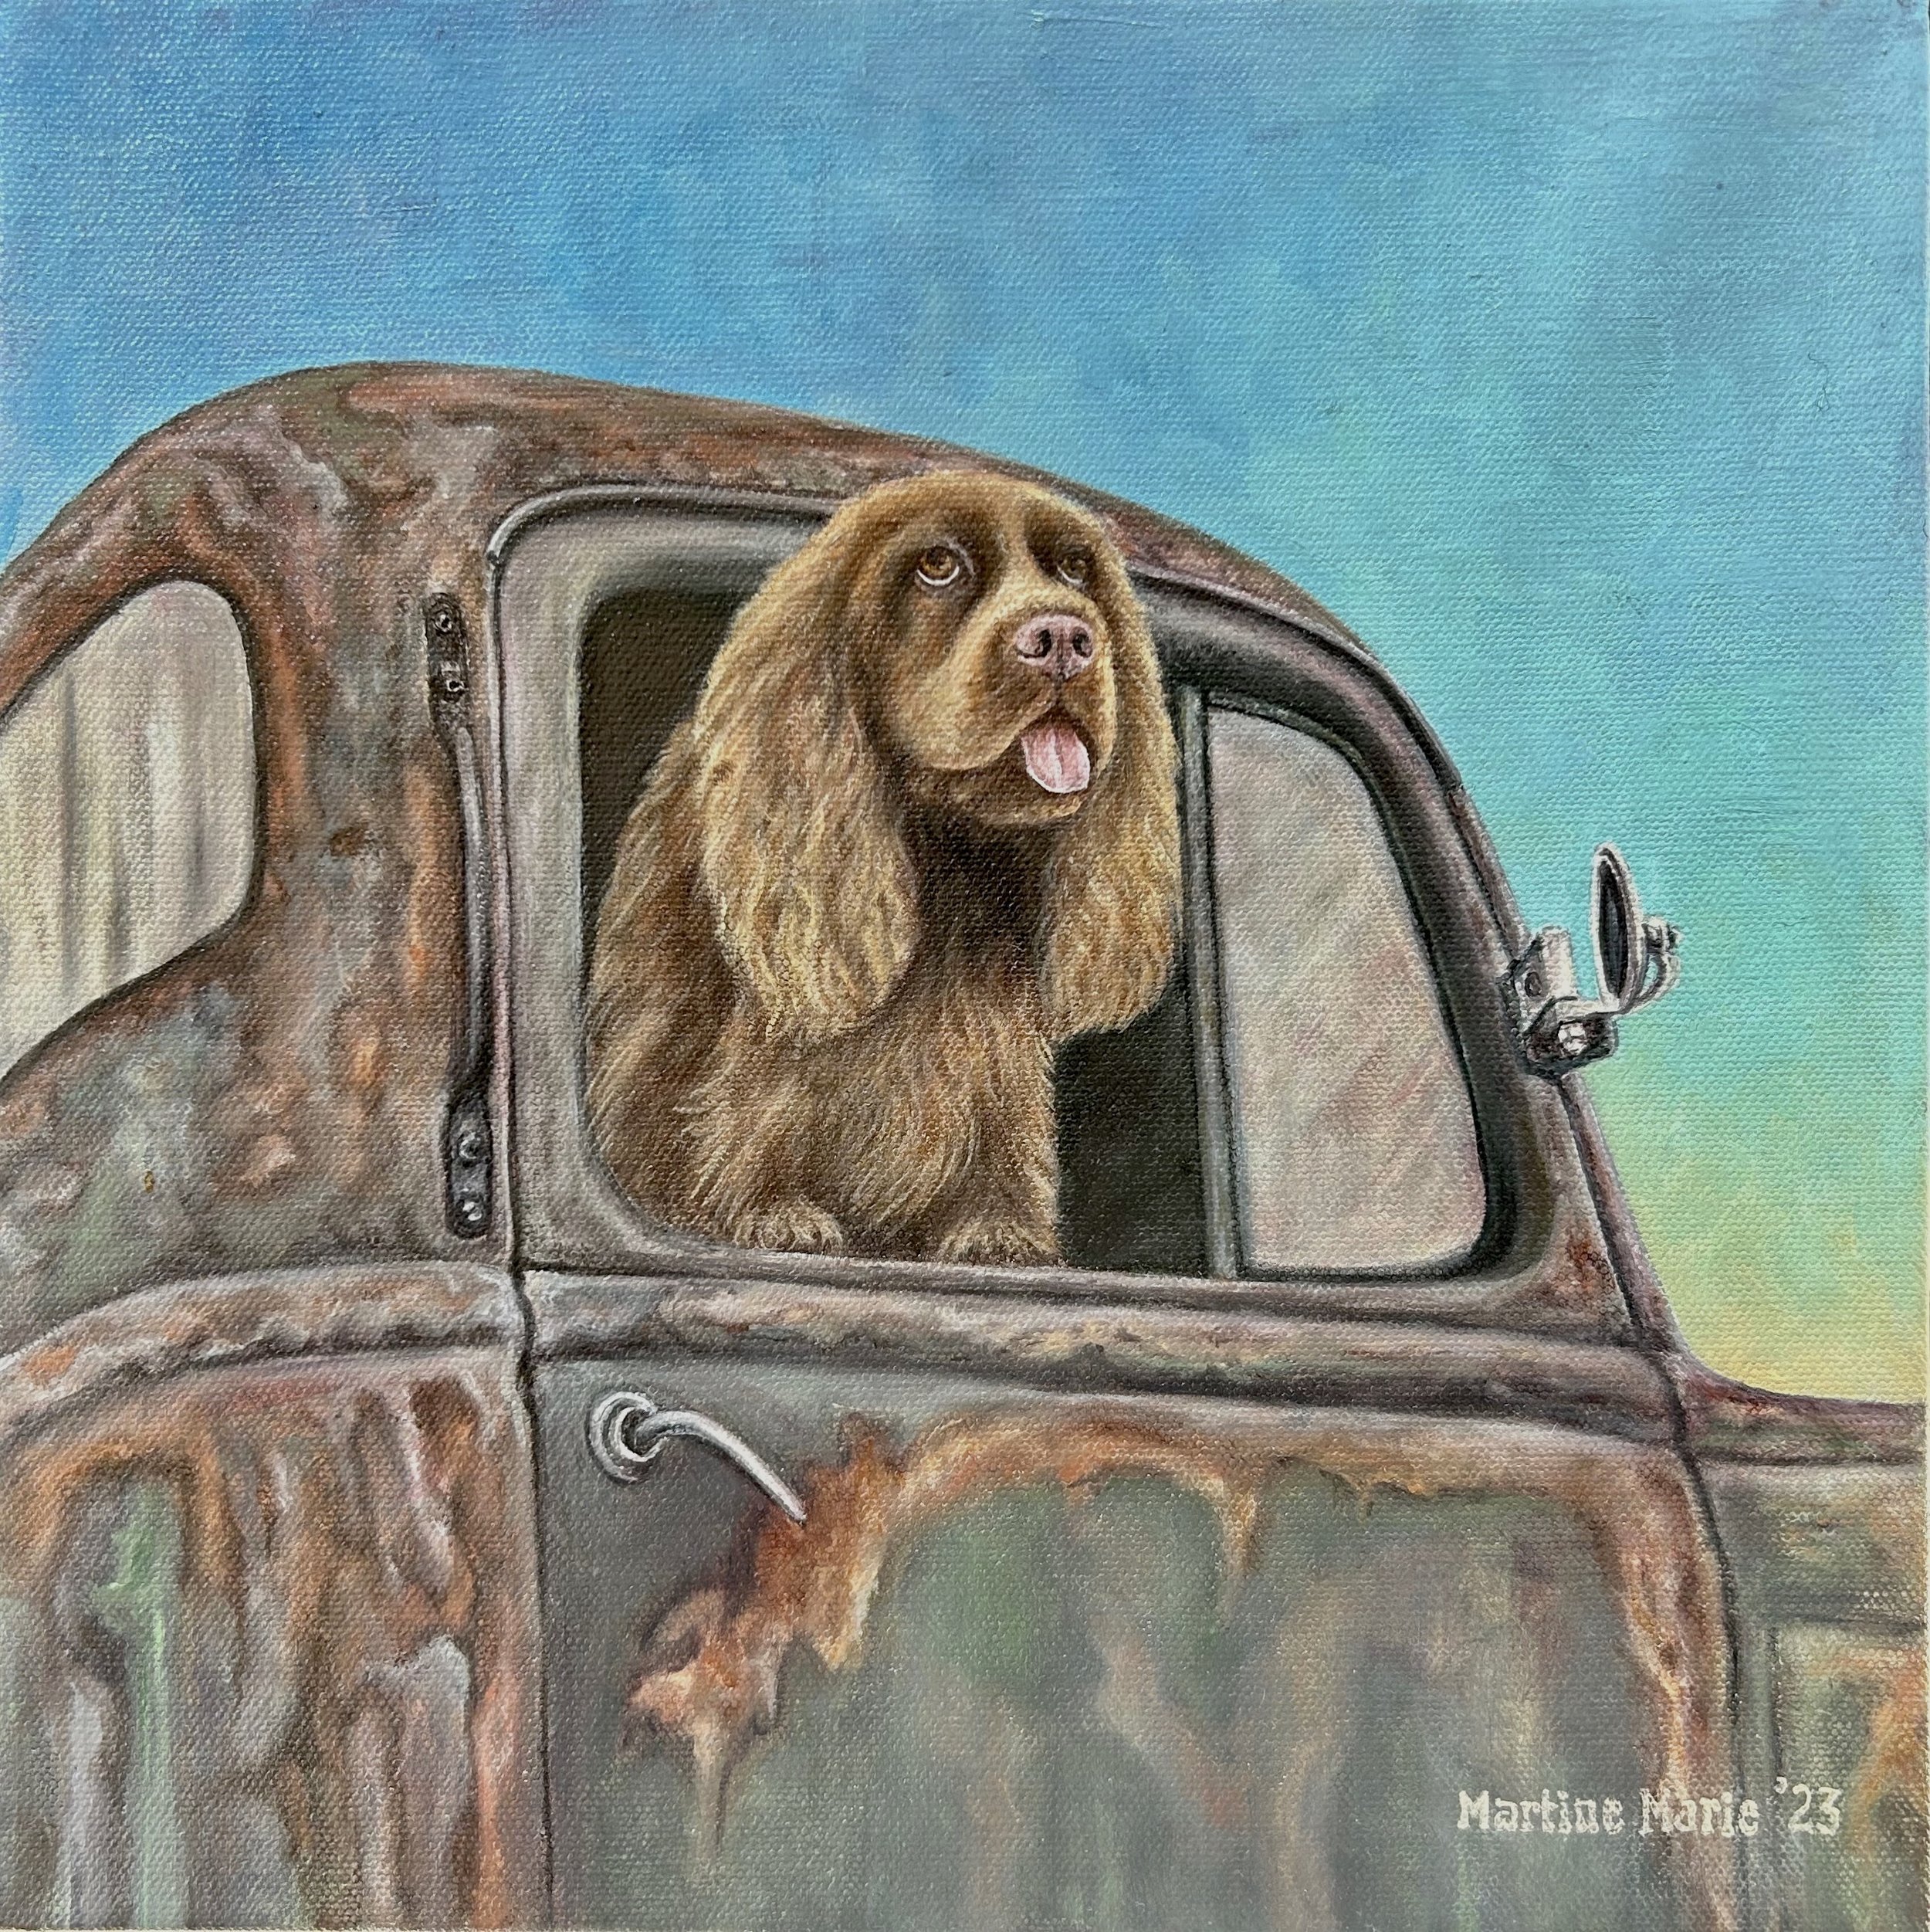 Sussex in Old Truck by Martine Marie